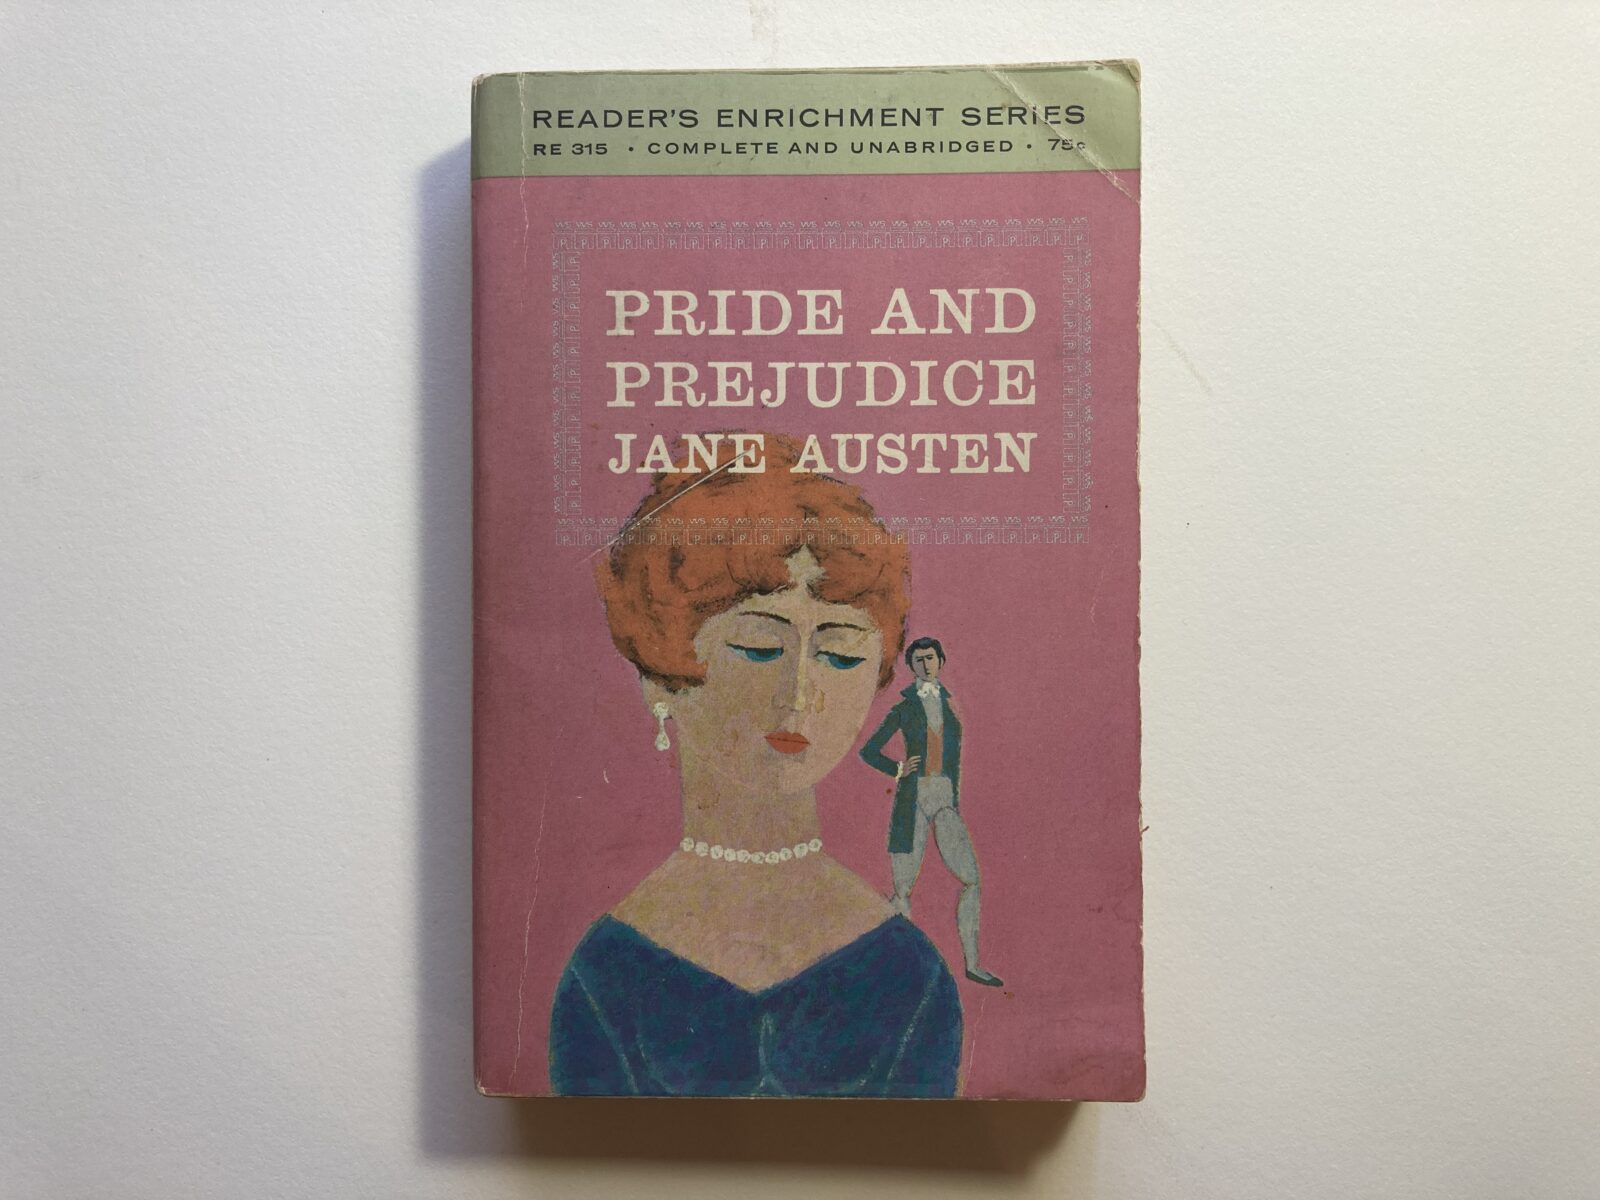 Pride and Prejudice, published by Washington Square Press, New York, 1964